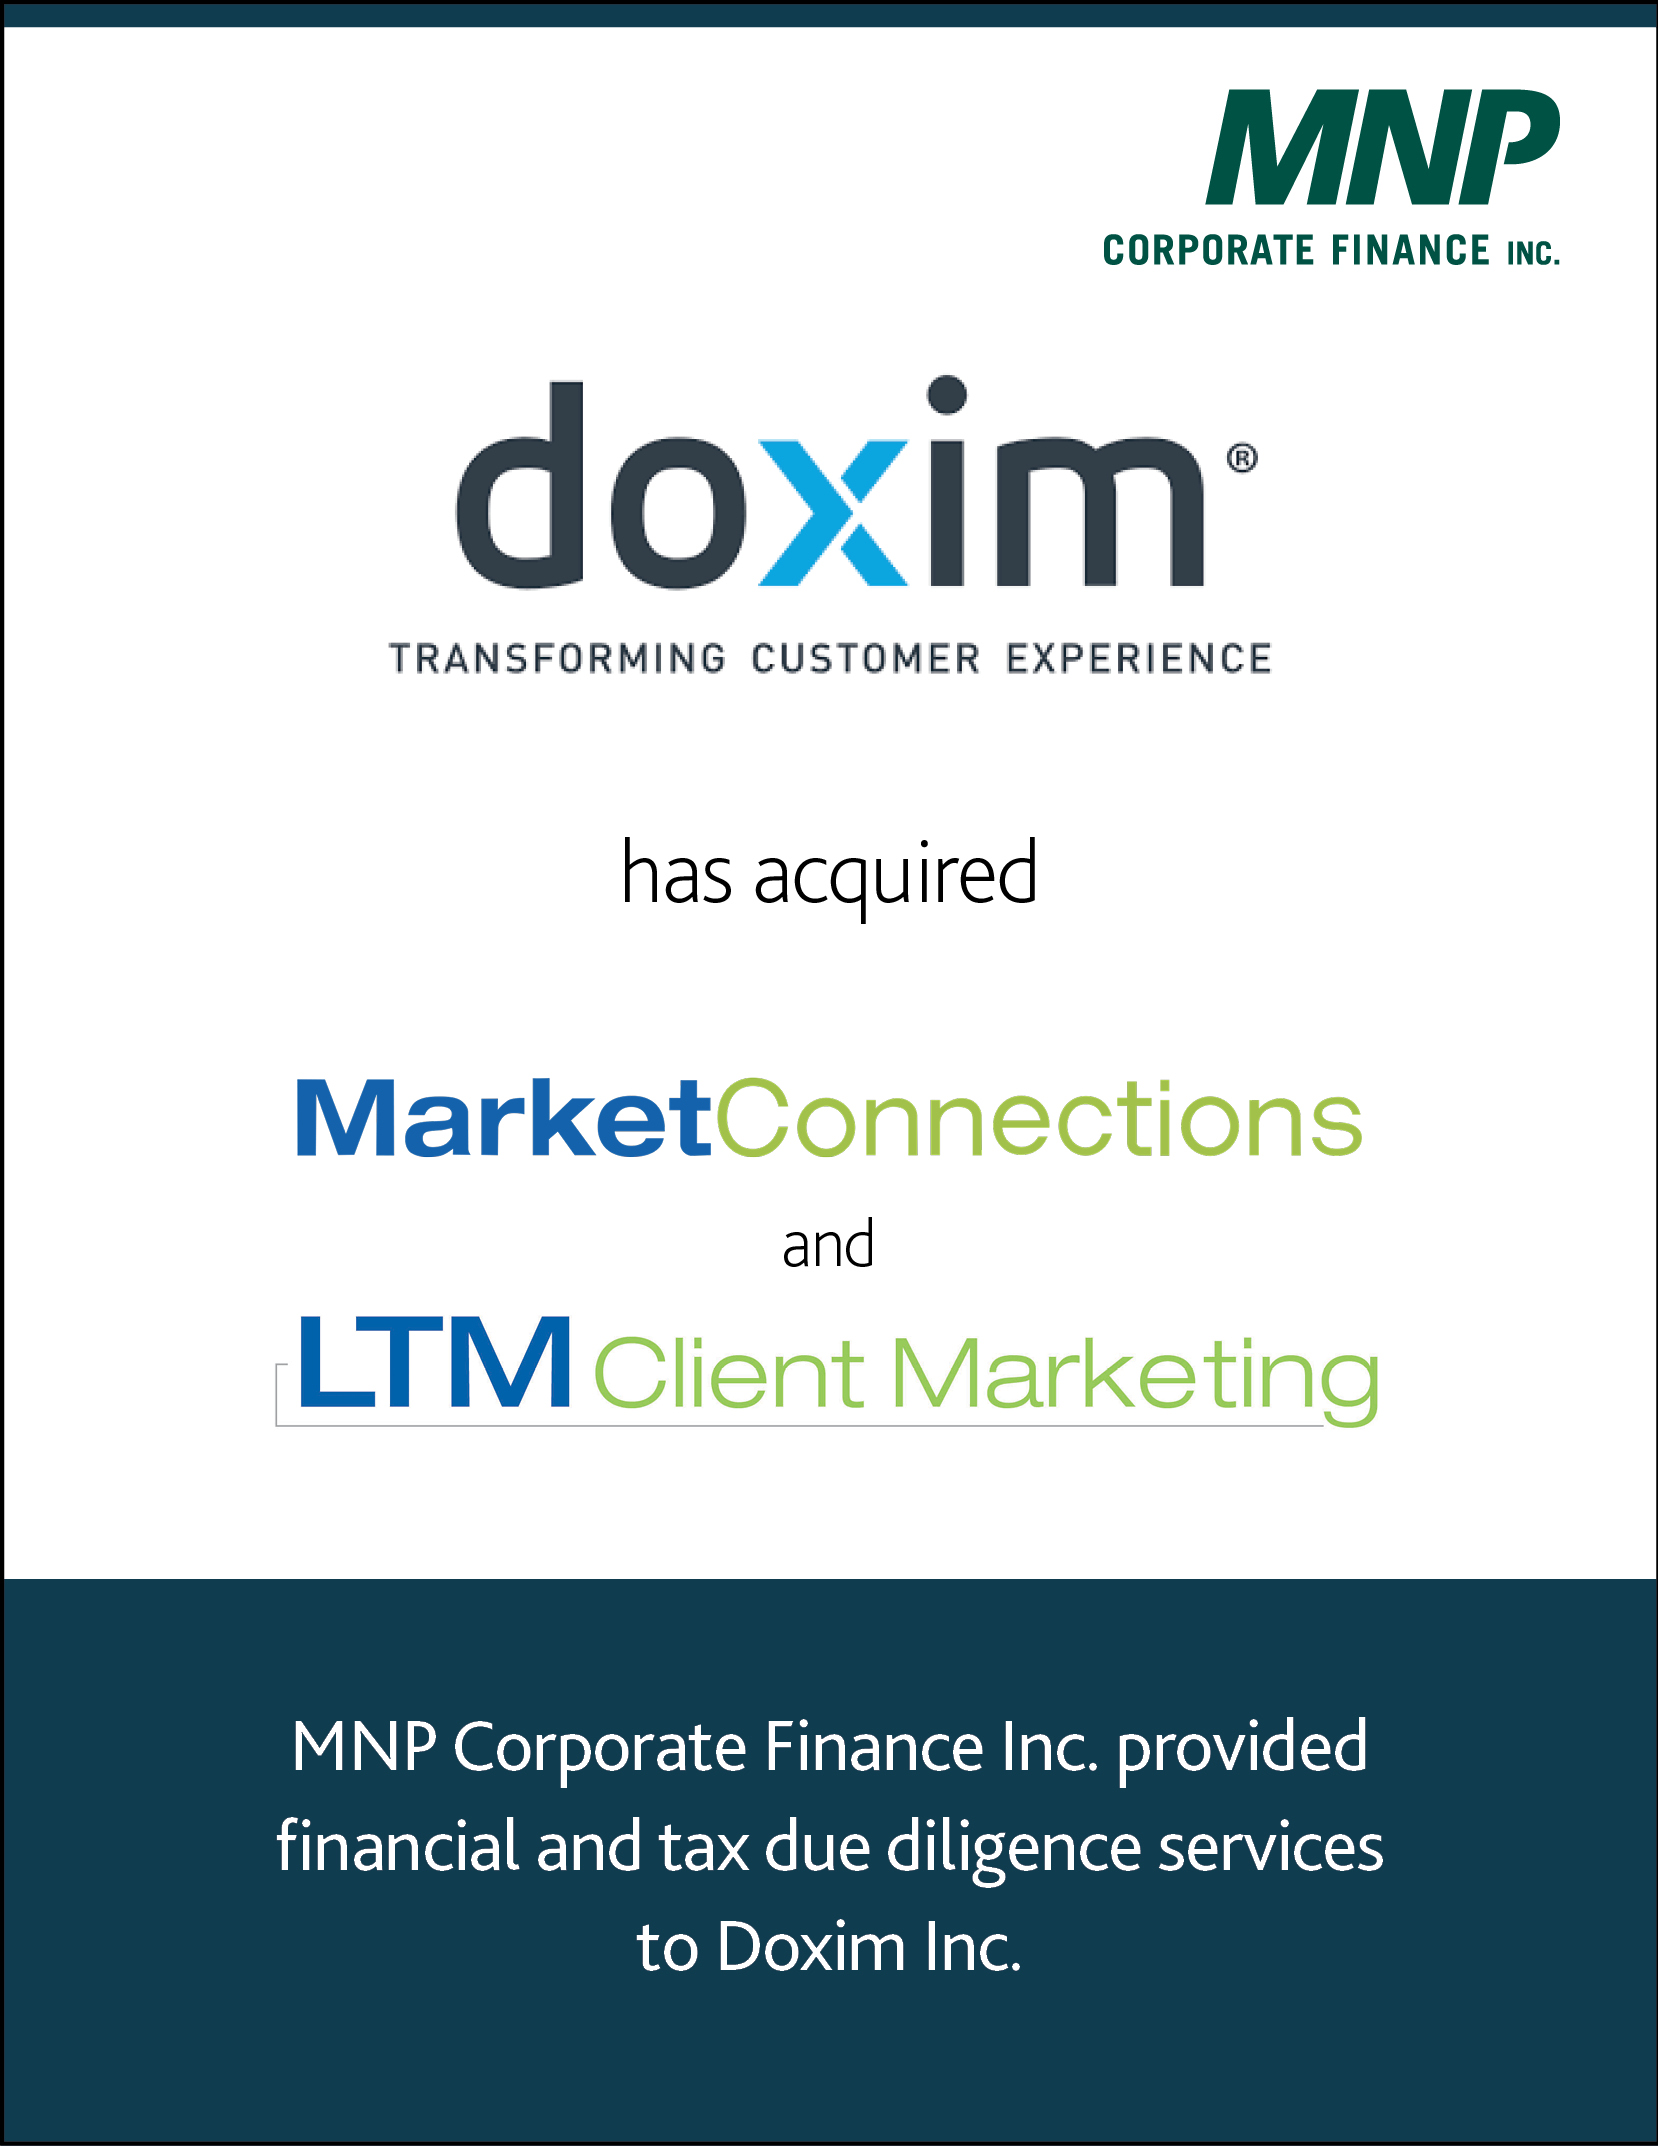 Doxim Inc. has acquired Market Connections Inc. and LTM Client Marketing Inc.